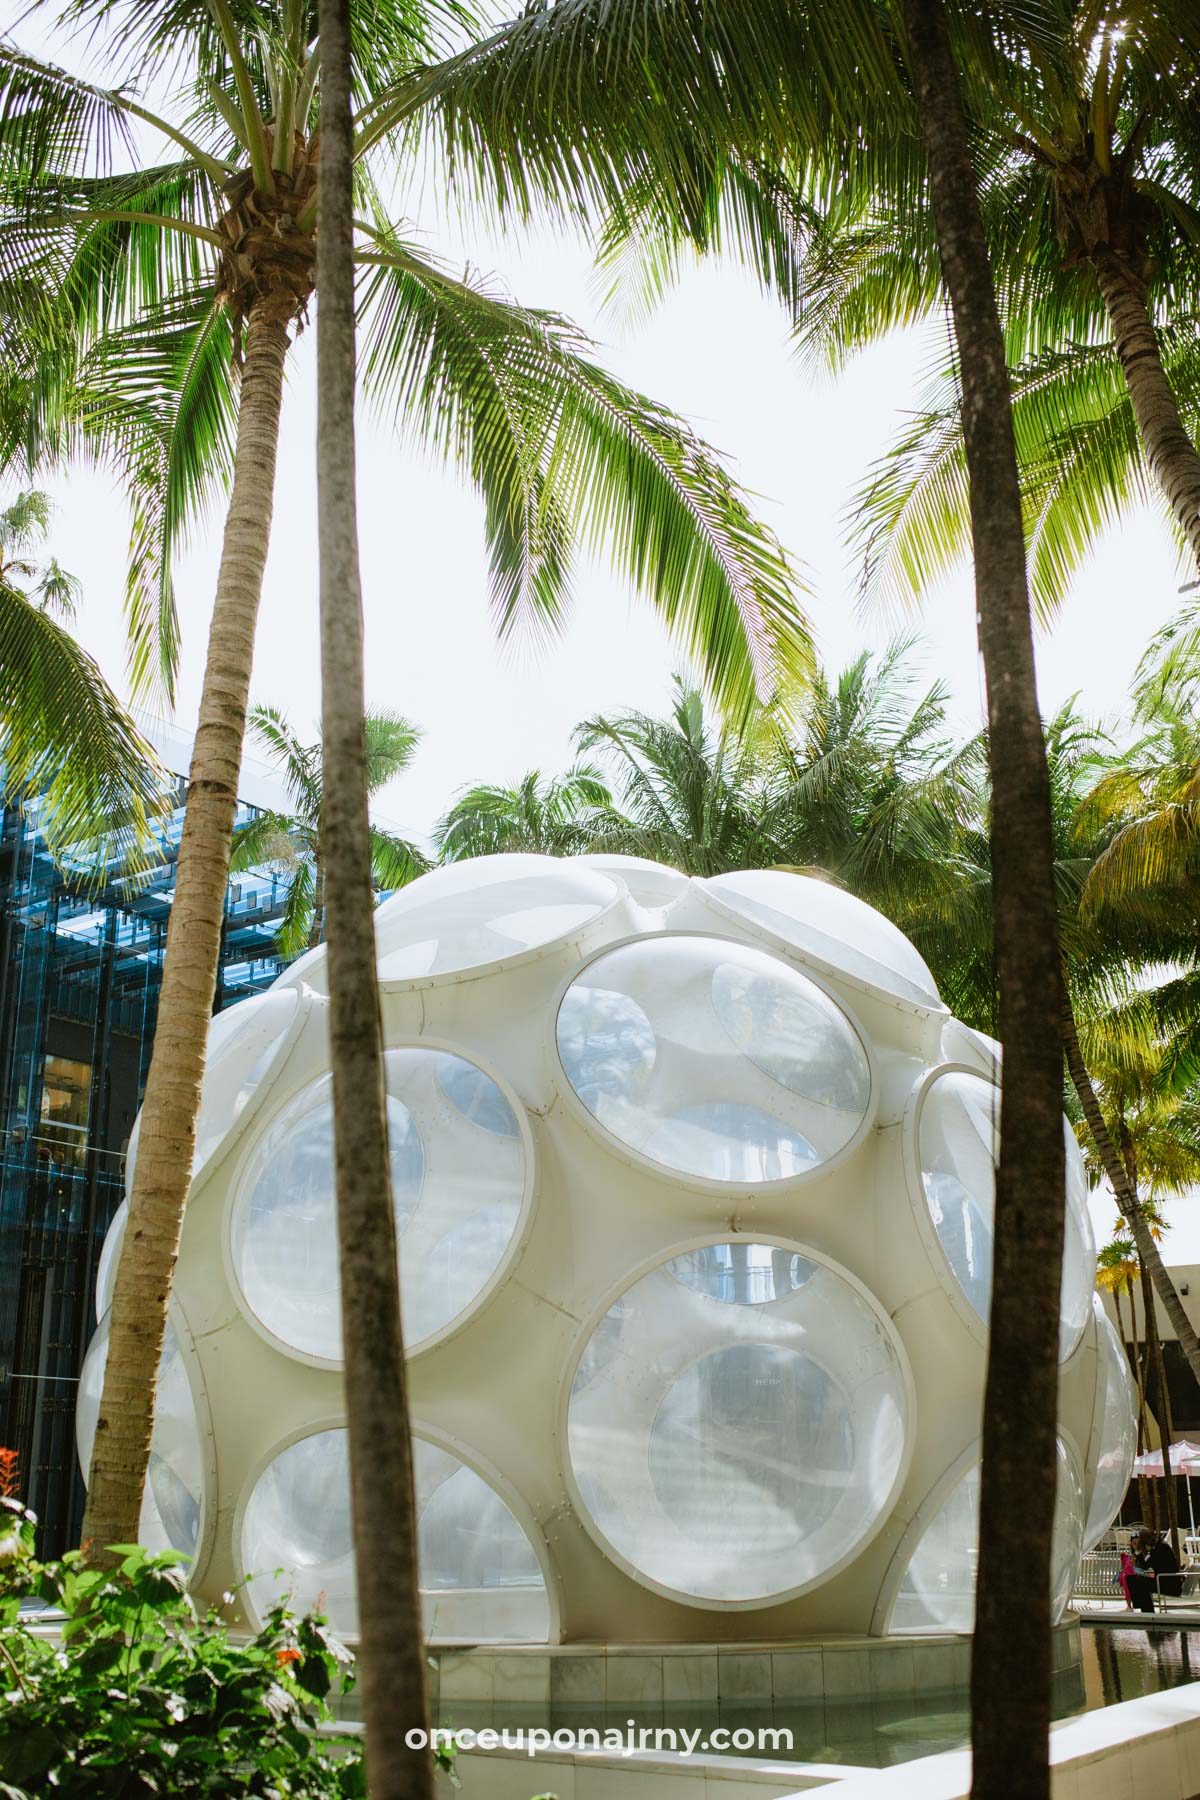 Fly's Eye Dome Design District what to do in Miami